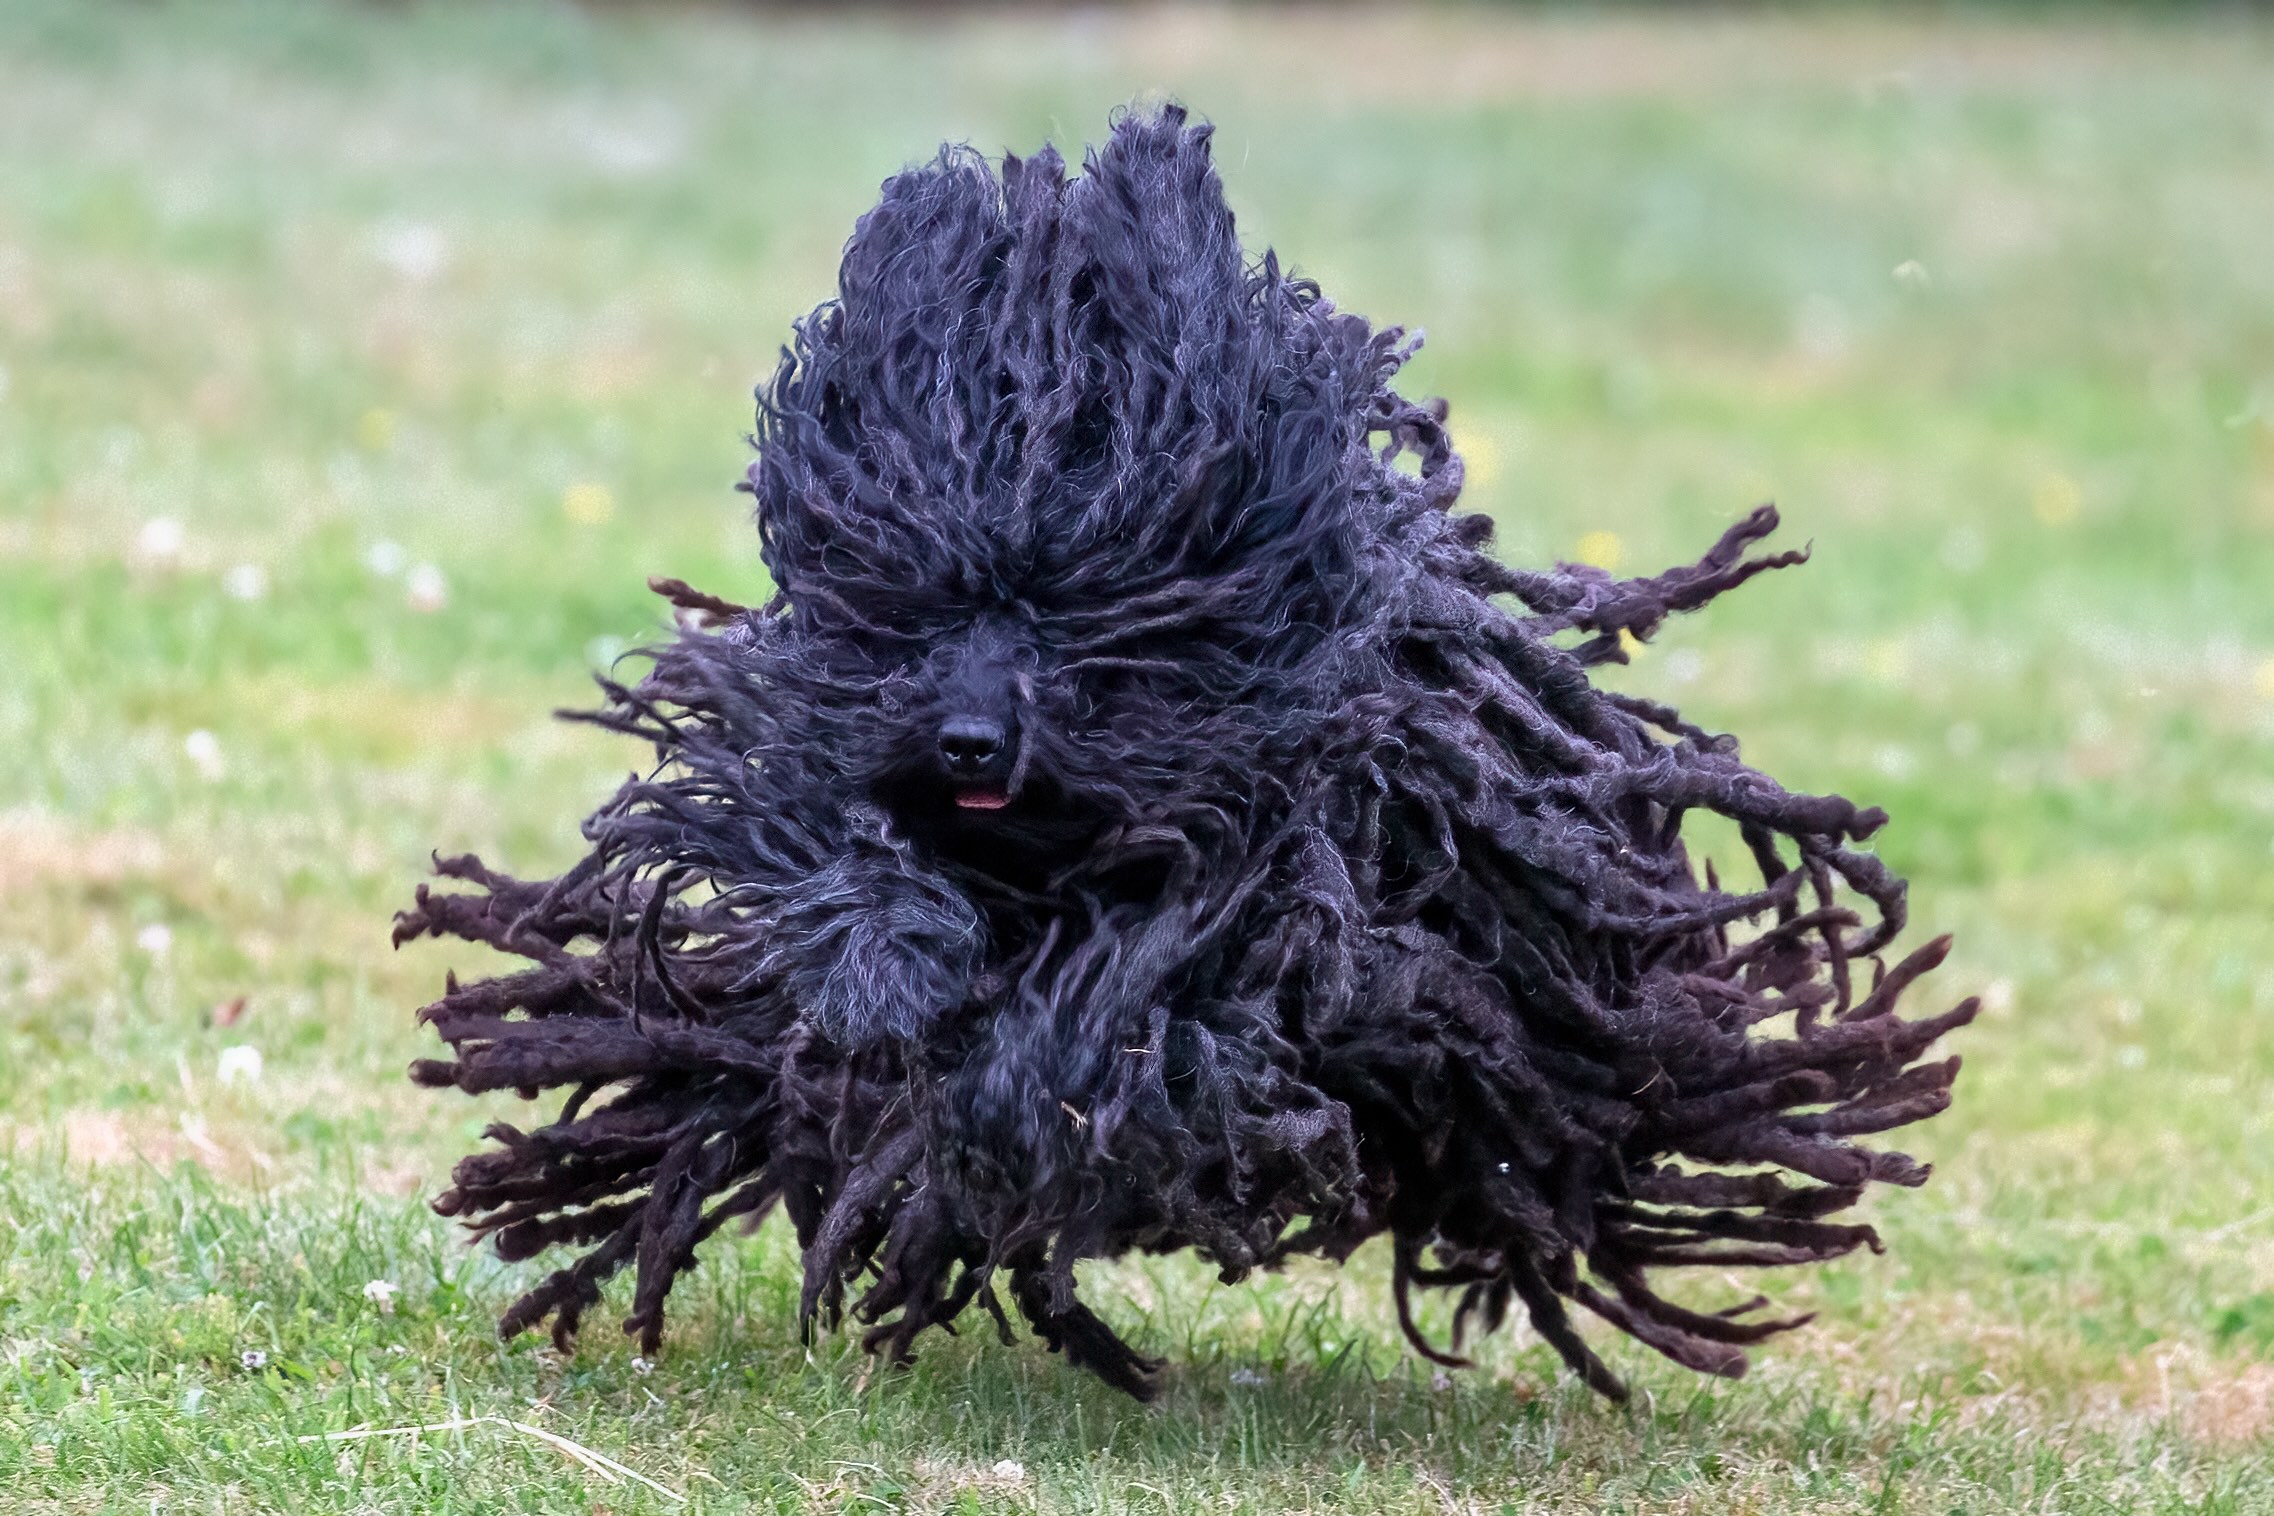 corded black puli dog running with fur flying everywhere like a mop